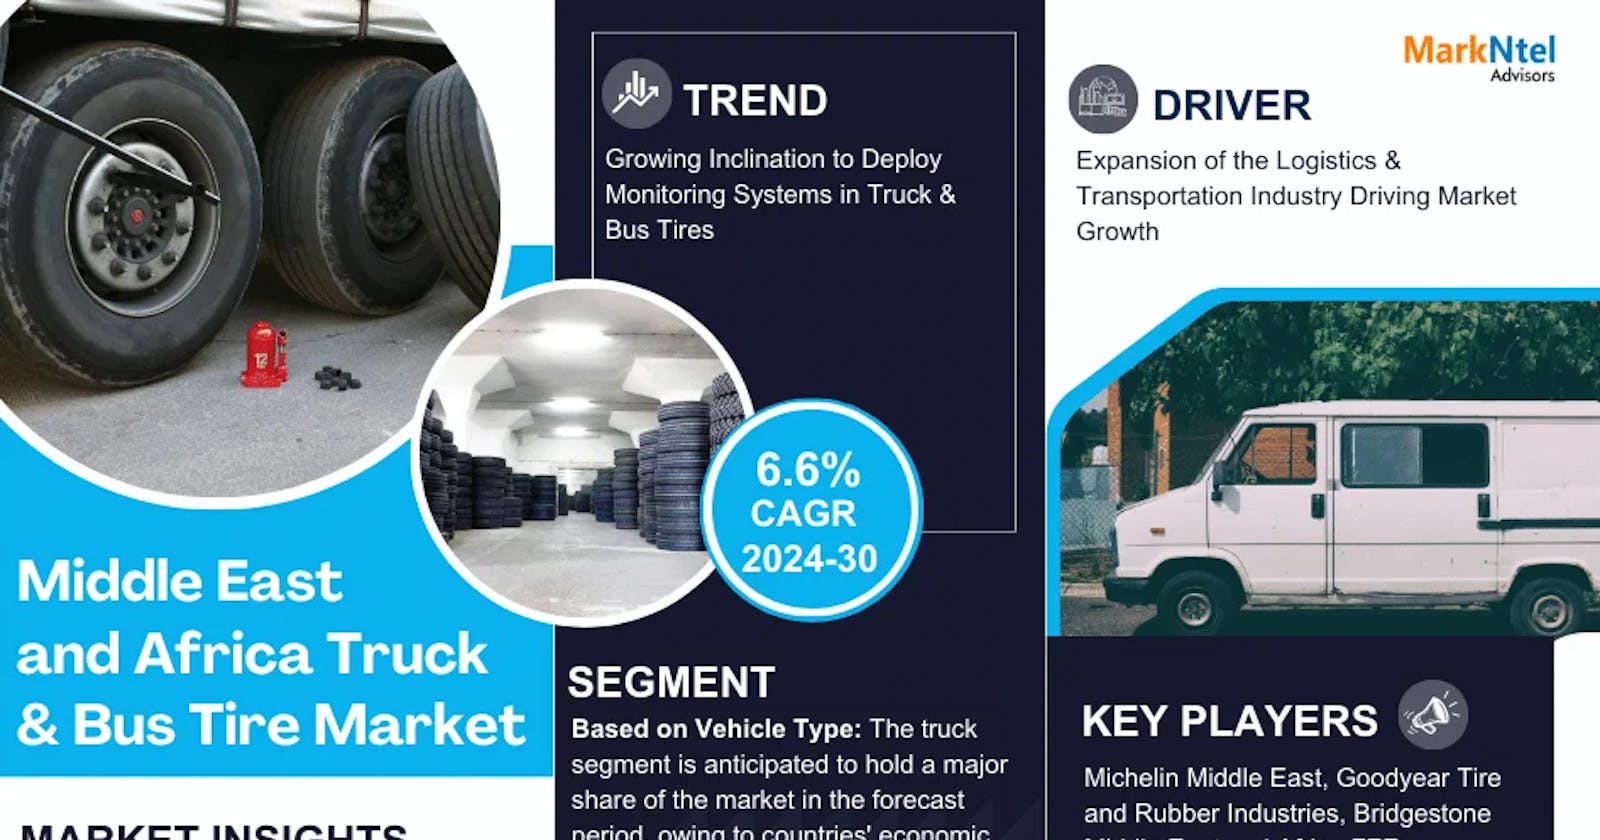 Middle East and Africa Truck & Bus Tire Market Share, Size, and Growth Forecast: 6.6% CAGR (2024-30)